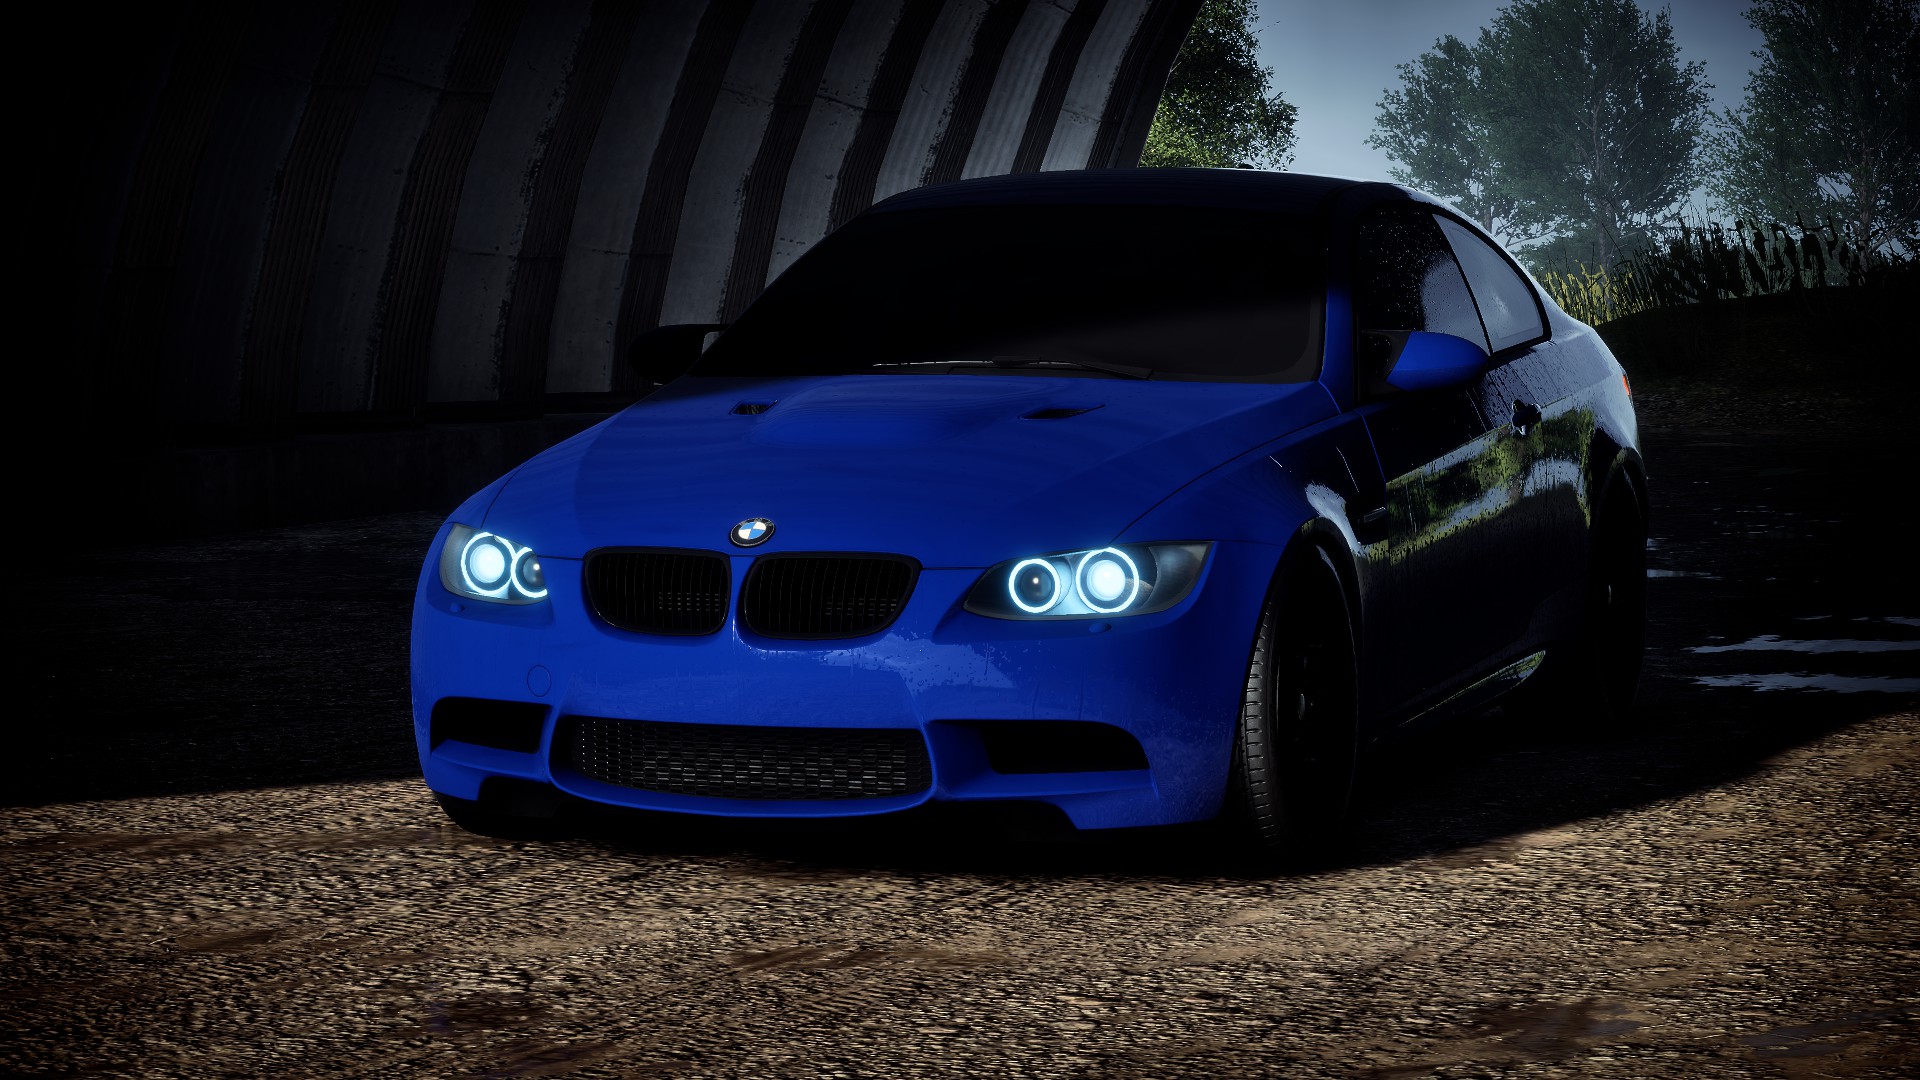 BMW M3 E92 Need For Speed Heat Dirt Road Tunnel Car 4K 1920x1080